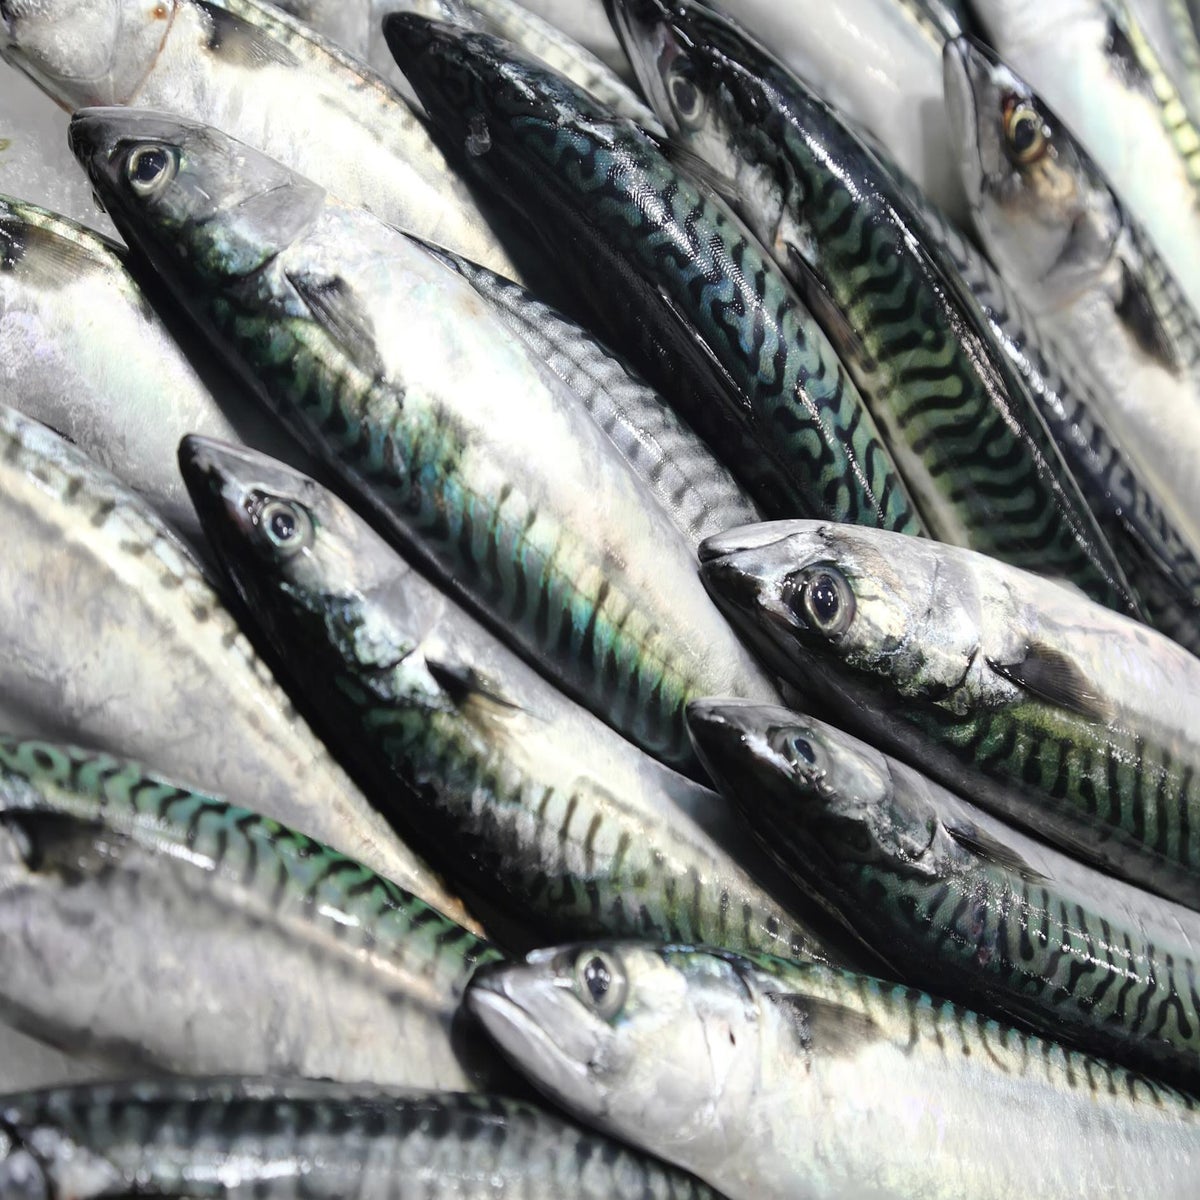 British mackerel has sustainable status stripped after years of overfishing, The Independent